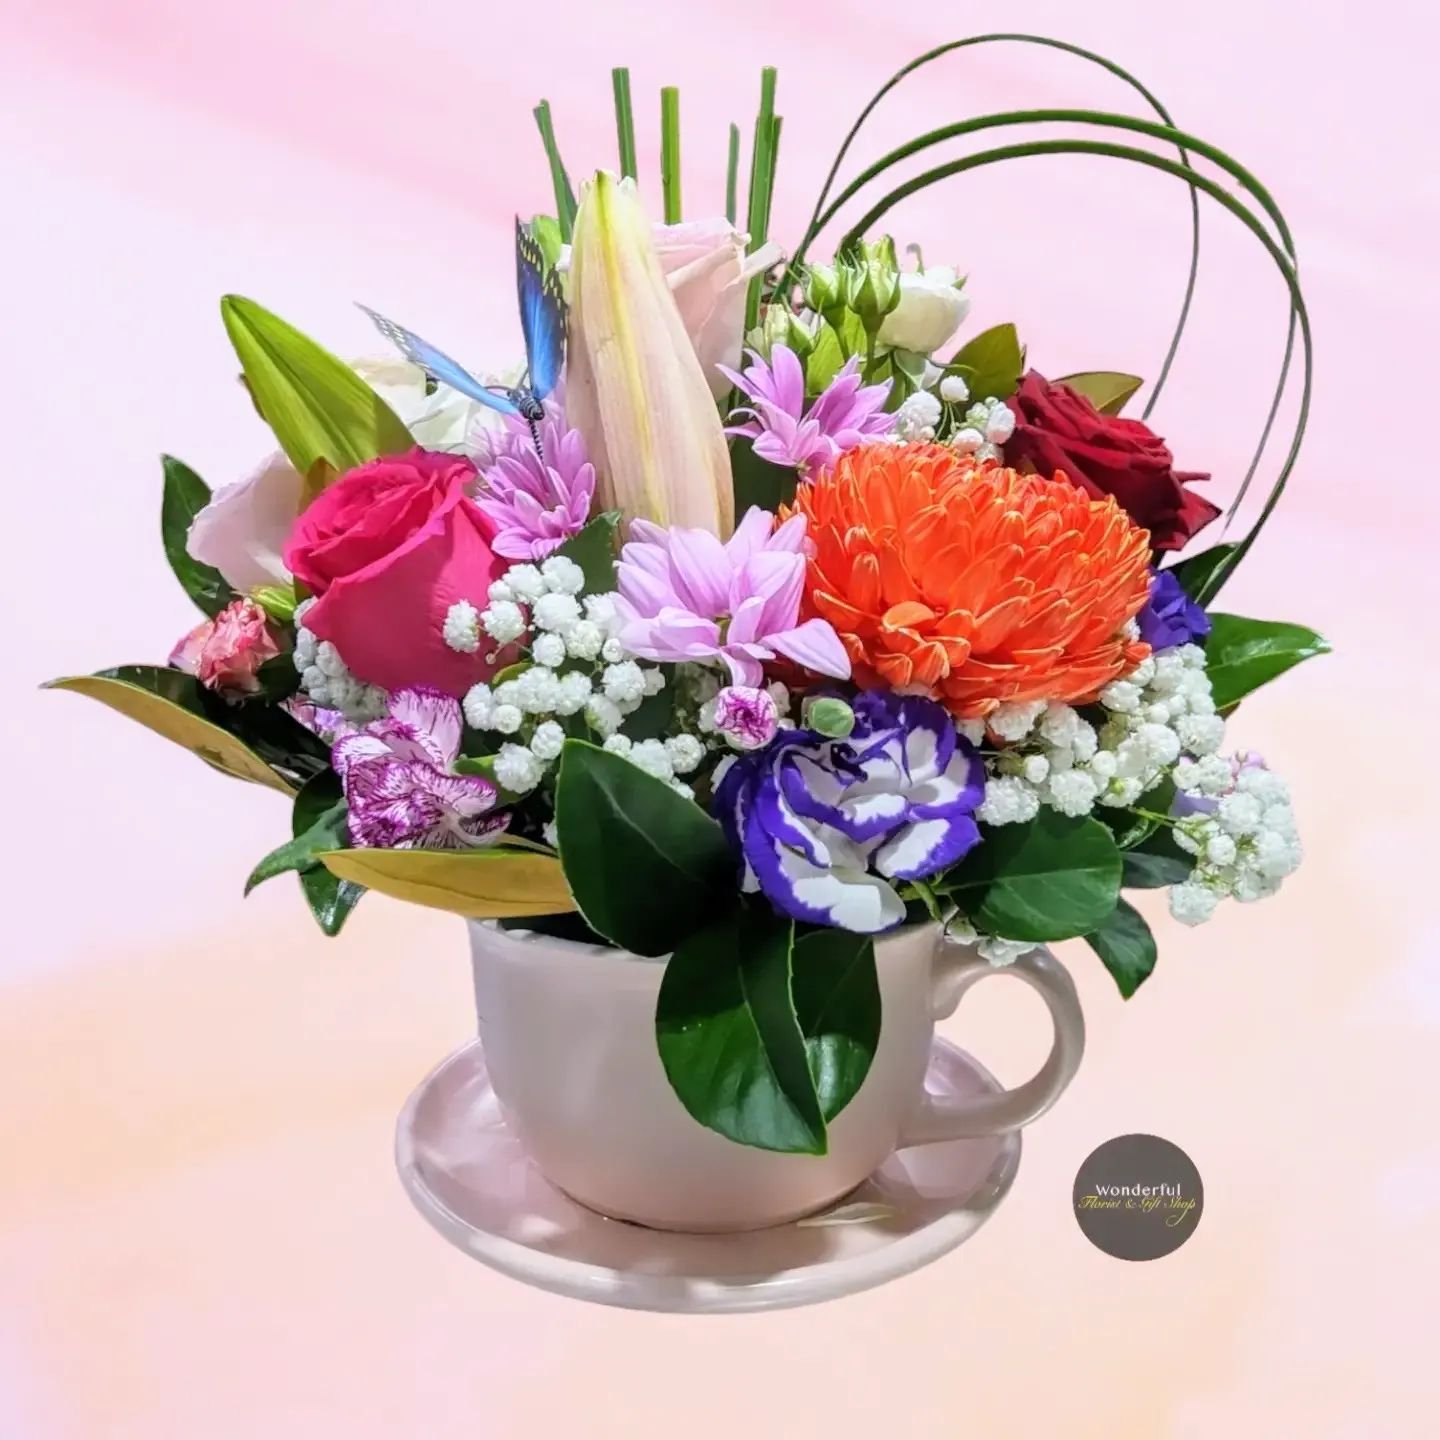 .
🌷Add a touch of elegance to your space with our charming teacup flower arrangements! 

🌸 Perfect for brightening up any corner or as a thoughtful gift.
&mdash;&mdash;&mdash;&mdash;&mdash;&mdash;&mdash;&mdash;&mdash;&mdash;&mdash;&mdash;&mdash;&md